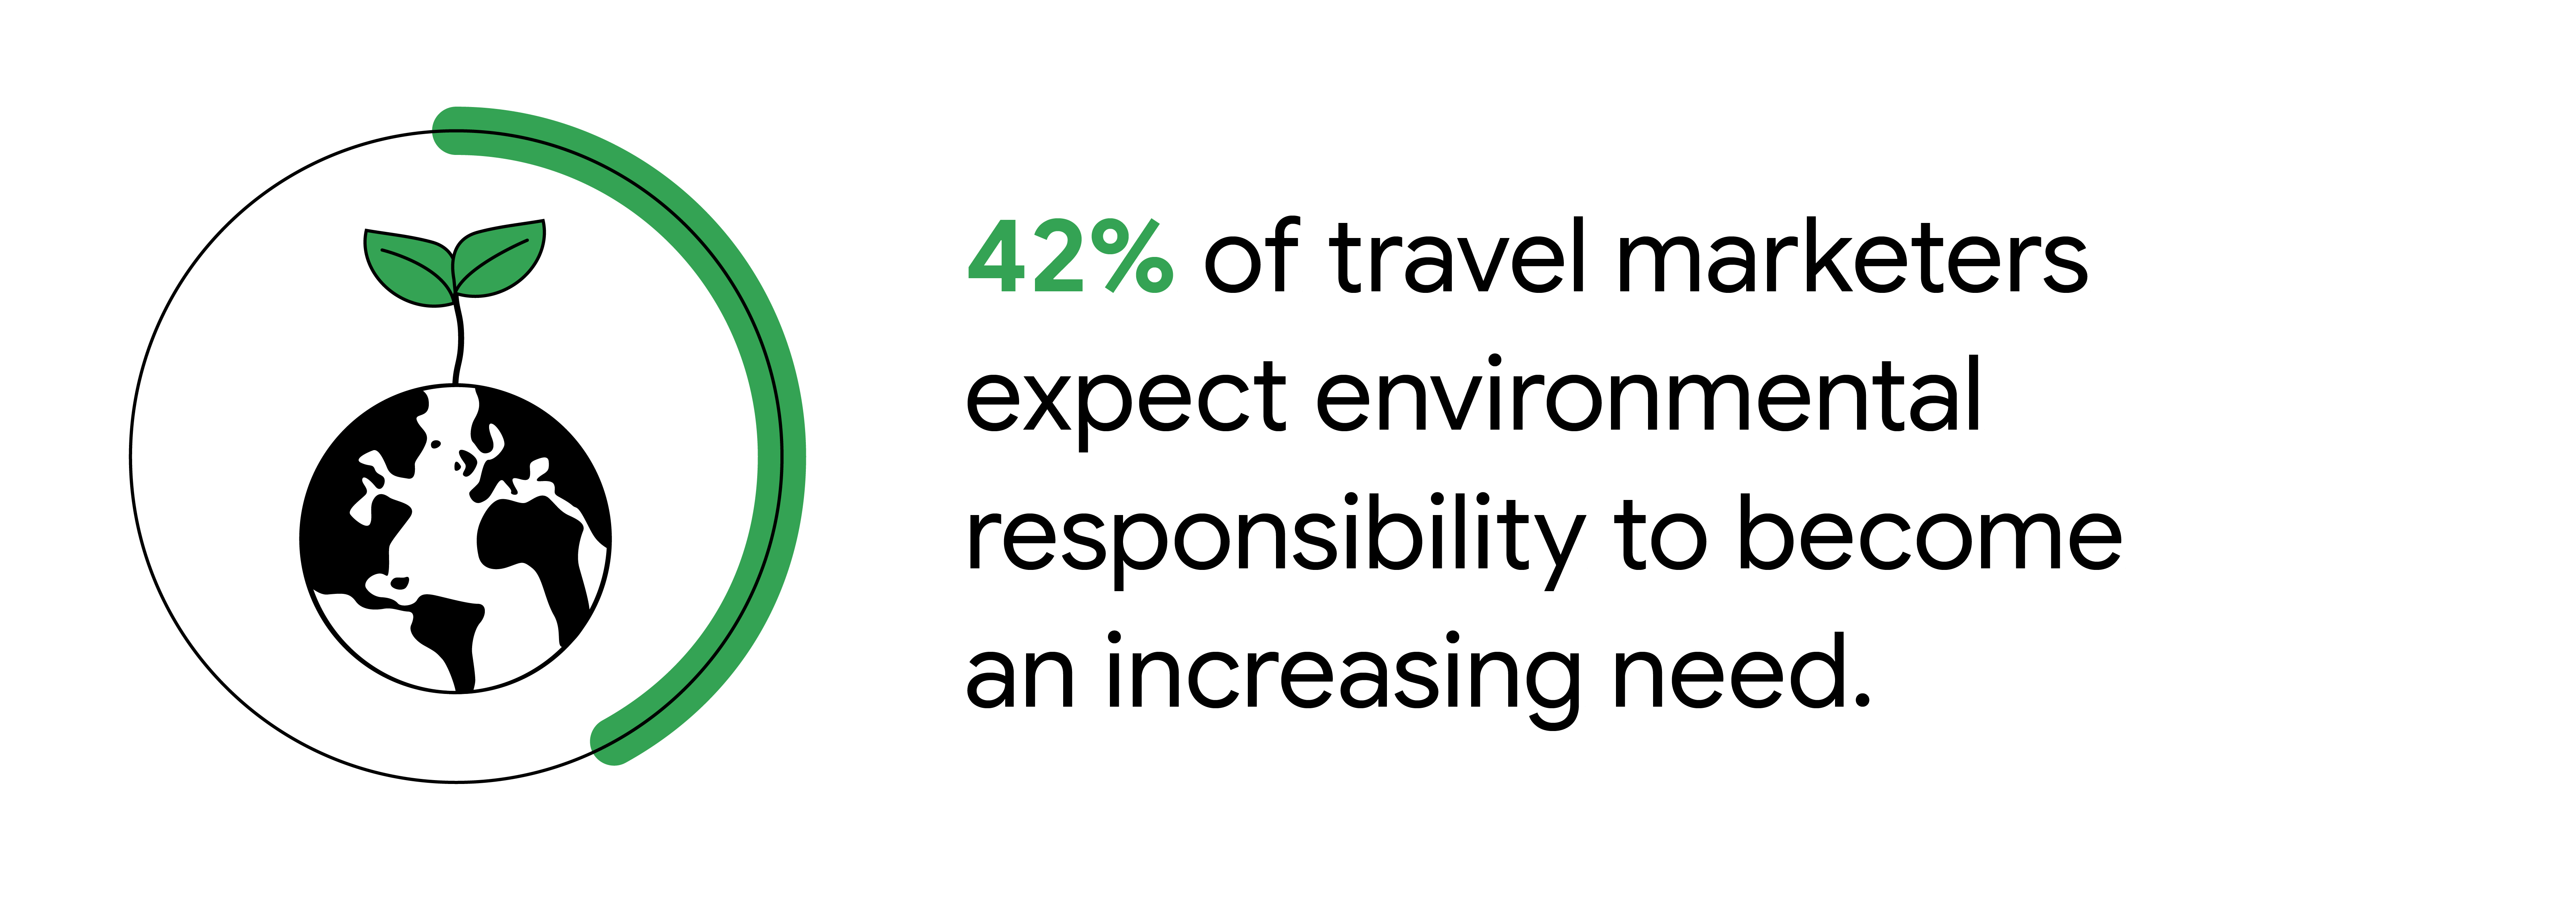 A black-and-white stat card with the text “42% of travel marketers expect environmental responsibility to become an increasing need”. To the left of the stat is an illustration of a globe with a green leaf growing out of the top.